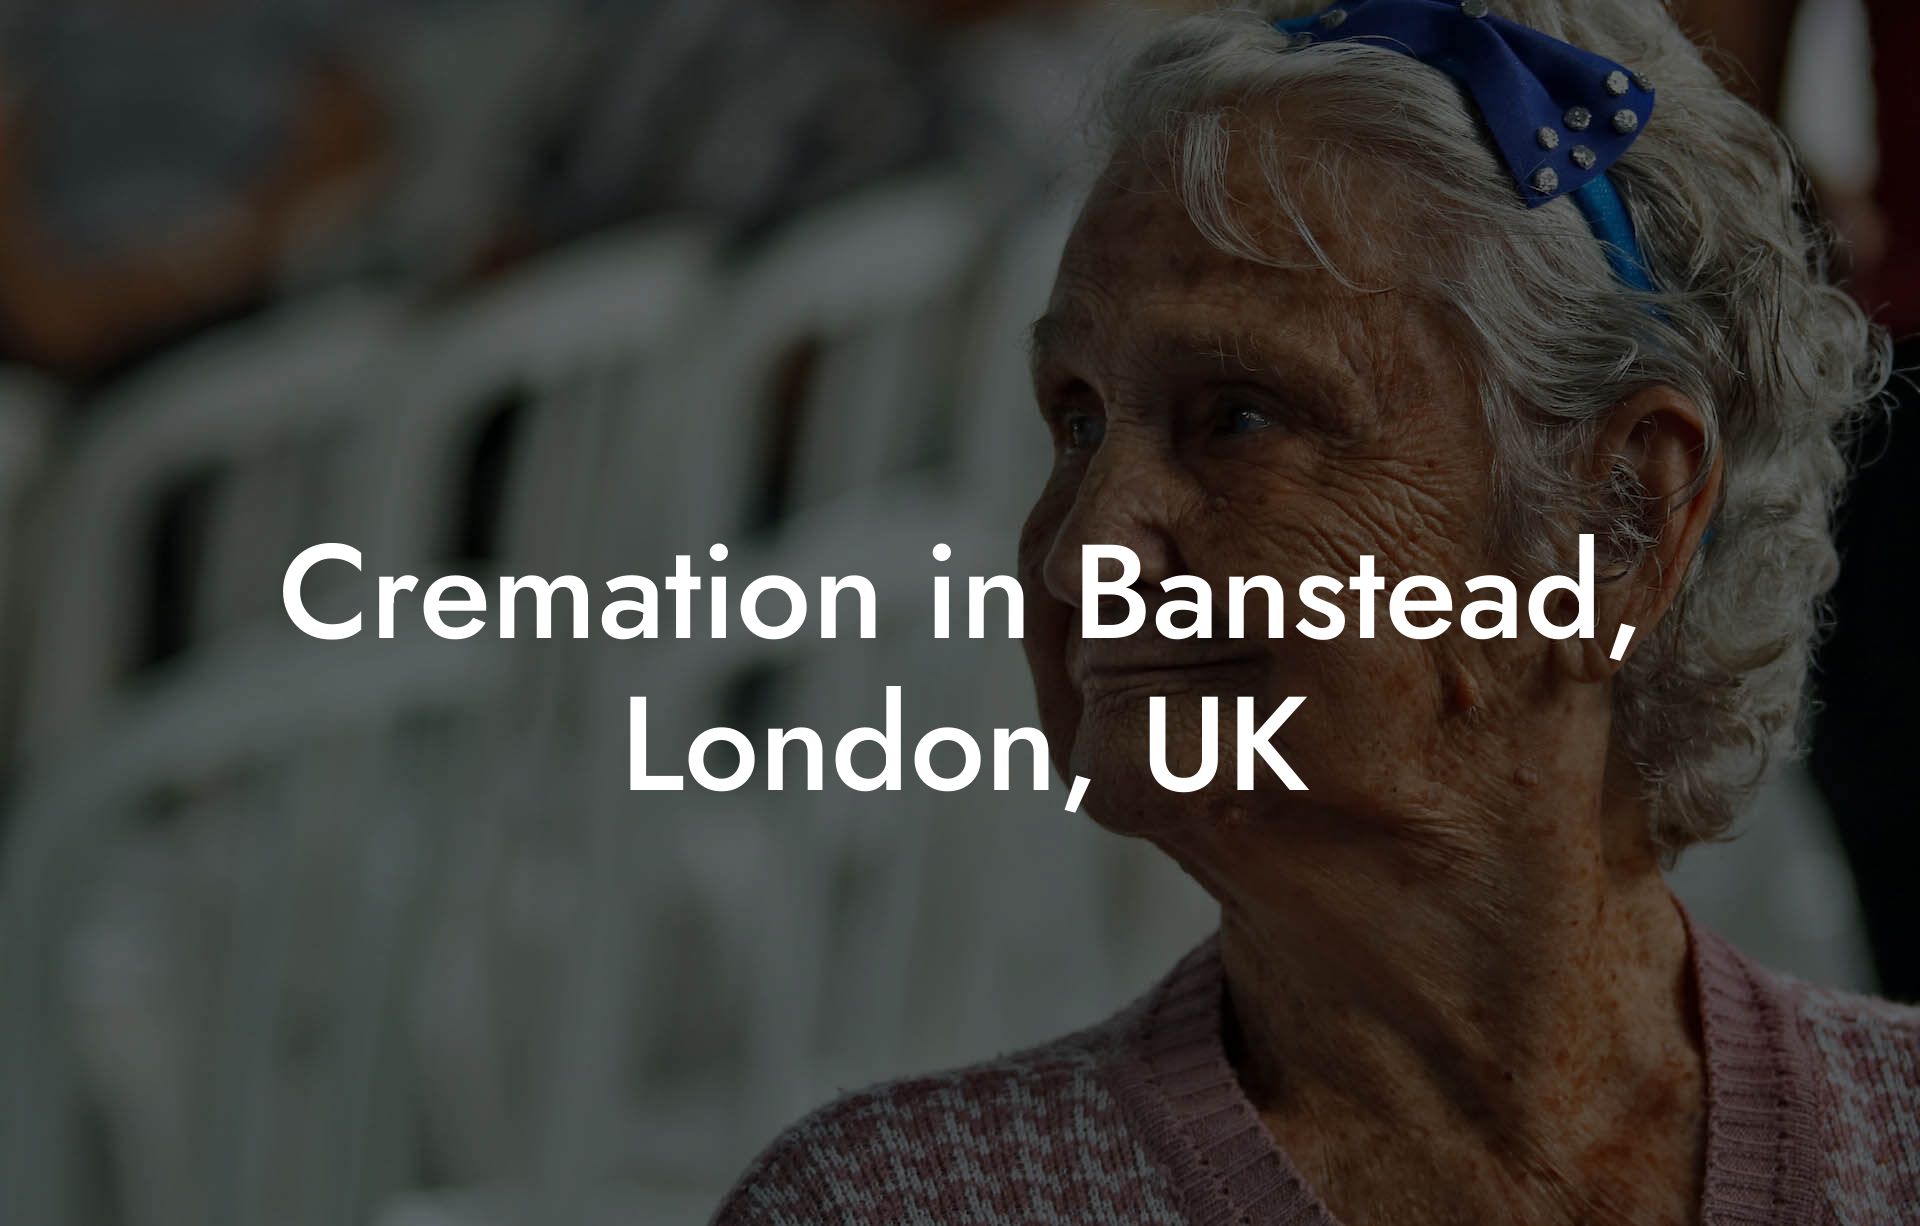 Cremation in Banstead, London, UK